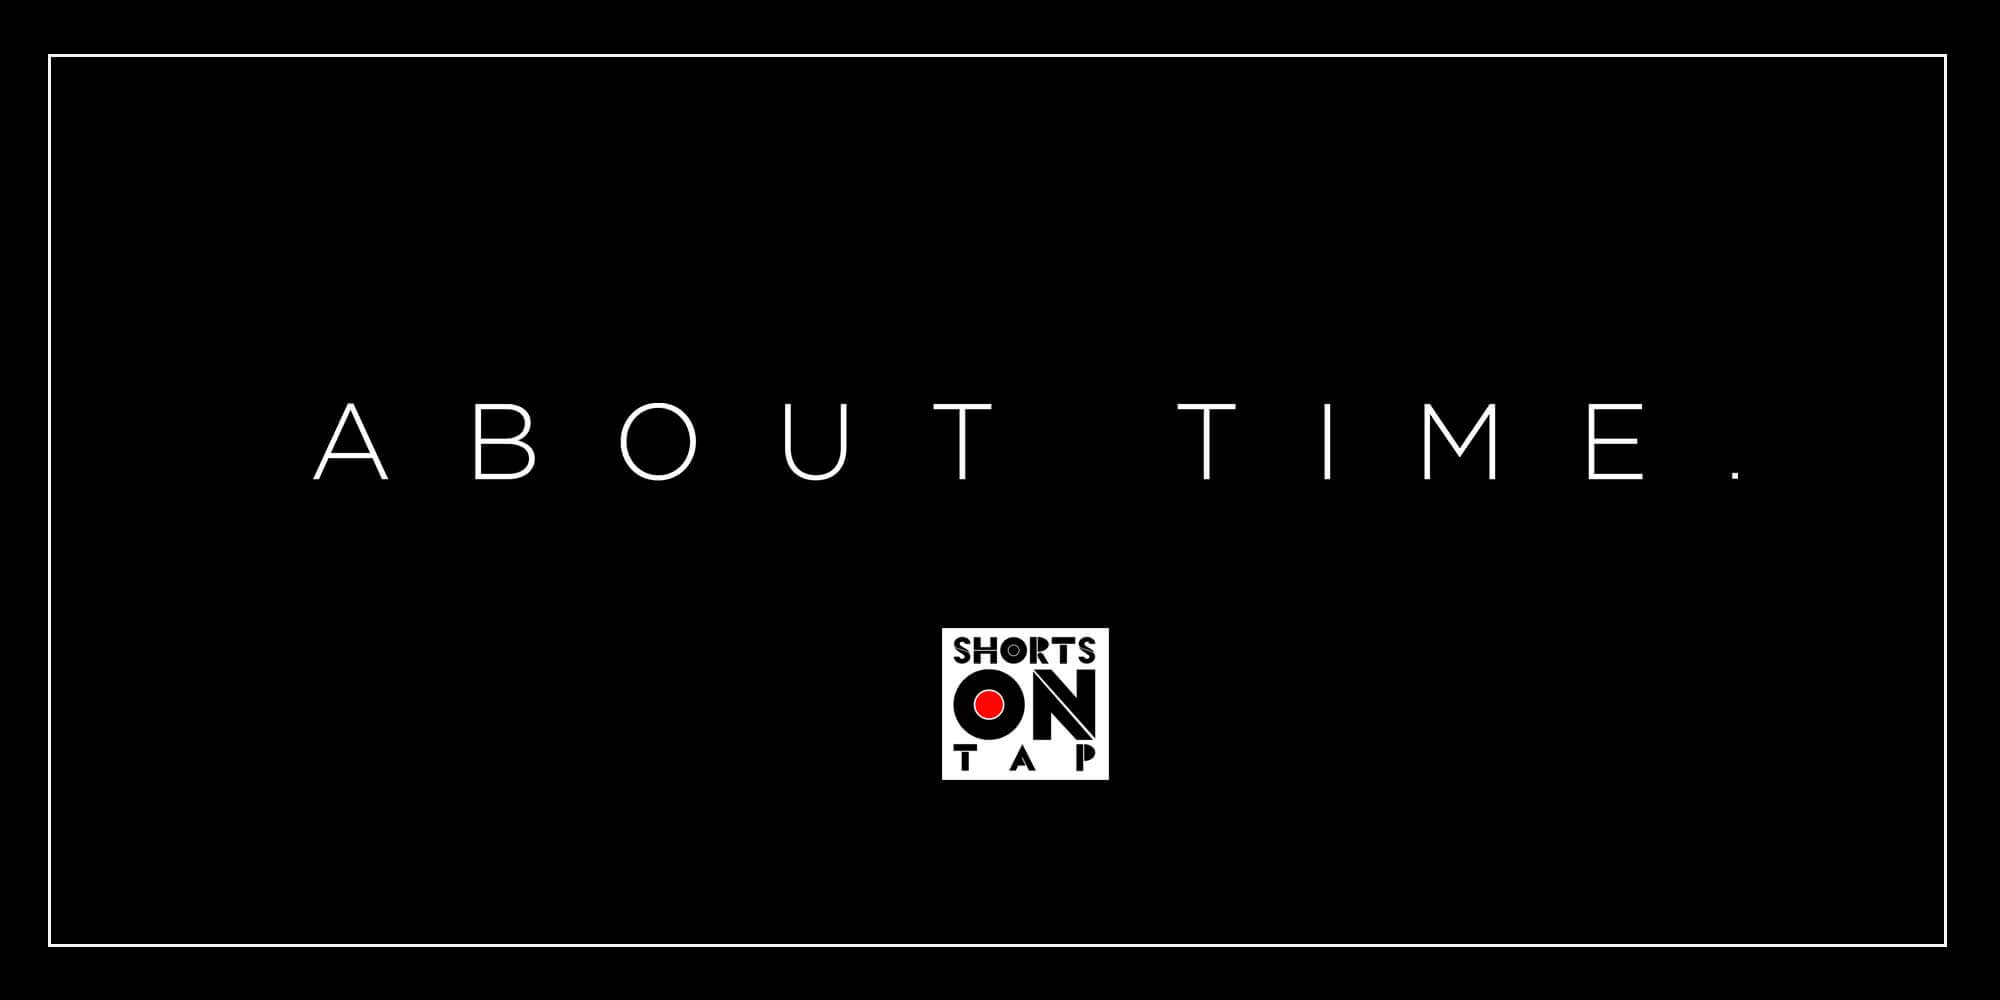 About Time x Shorts on Tap | About Time Magazine